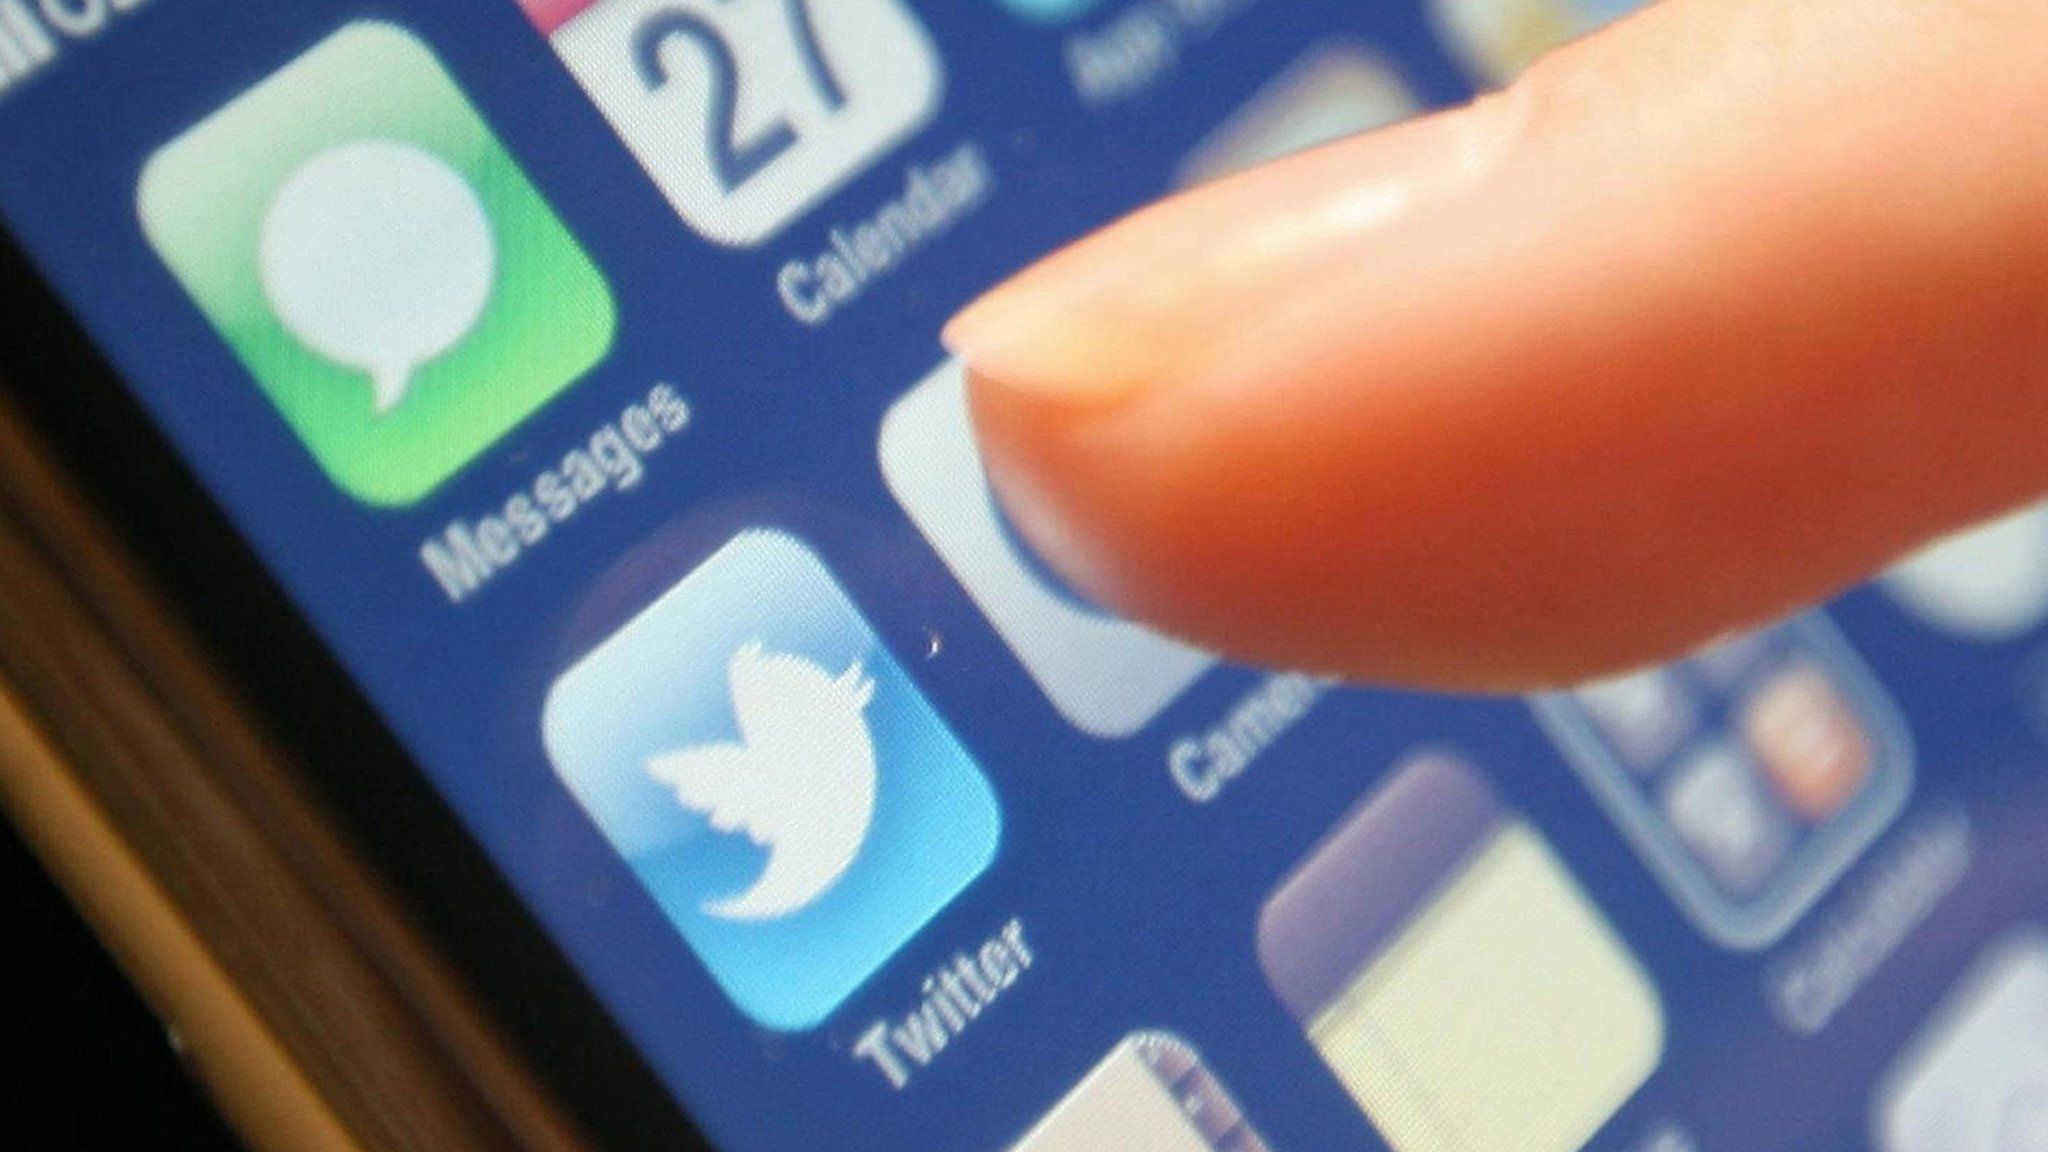 A finger about to press the Twitter button on a phone